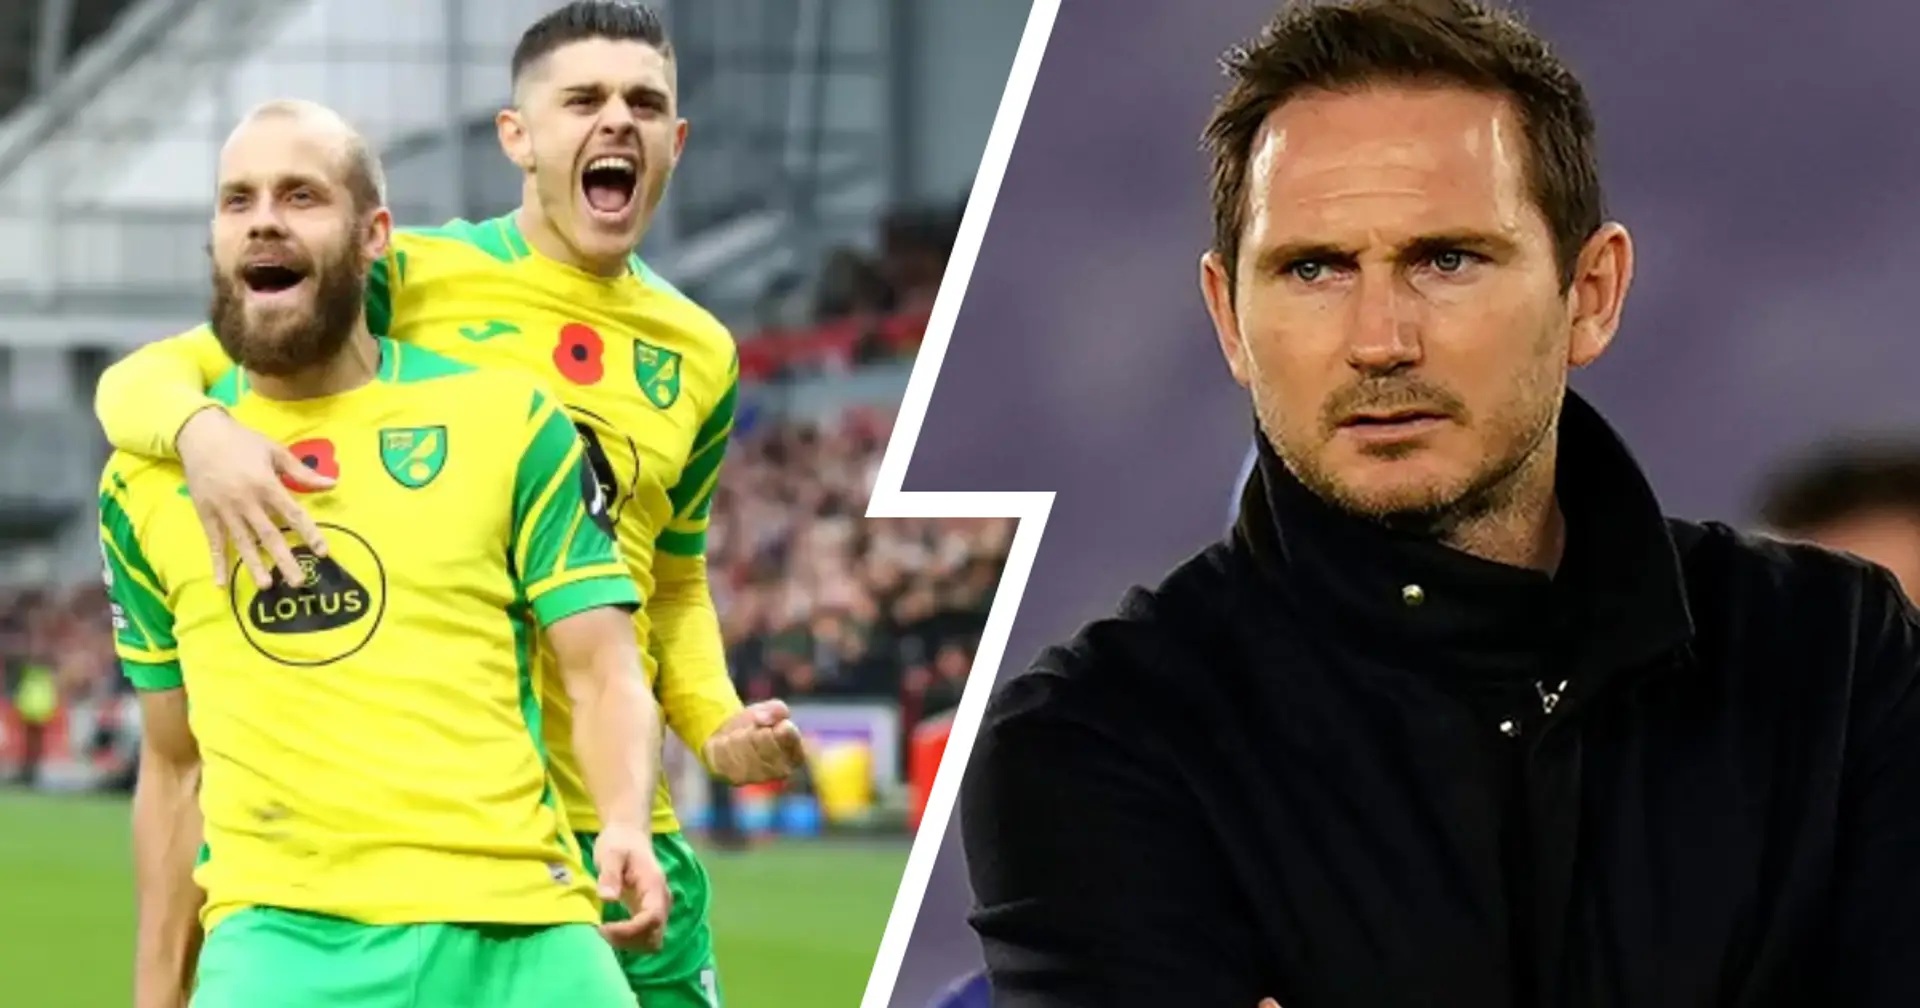 'They've been garbage': Blues fan explains why Norwich job might not be good for Lampard